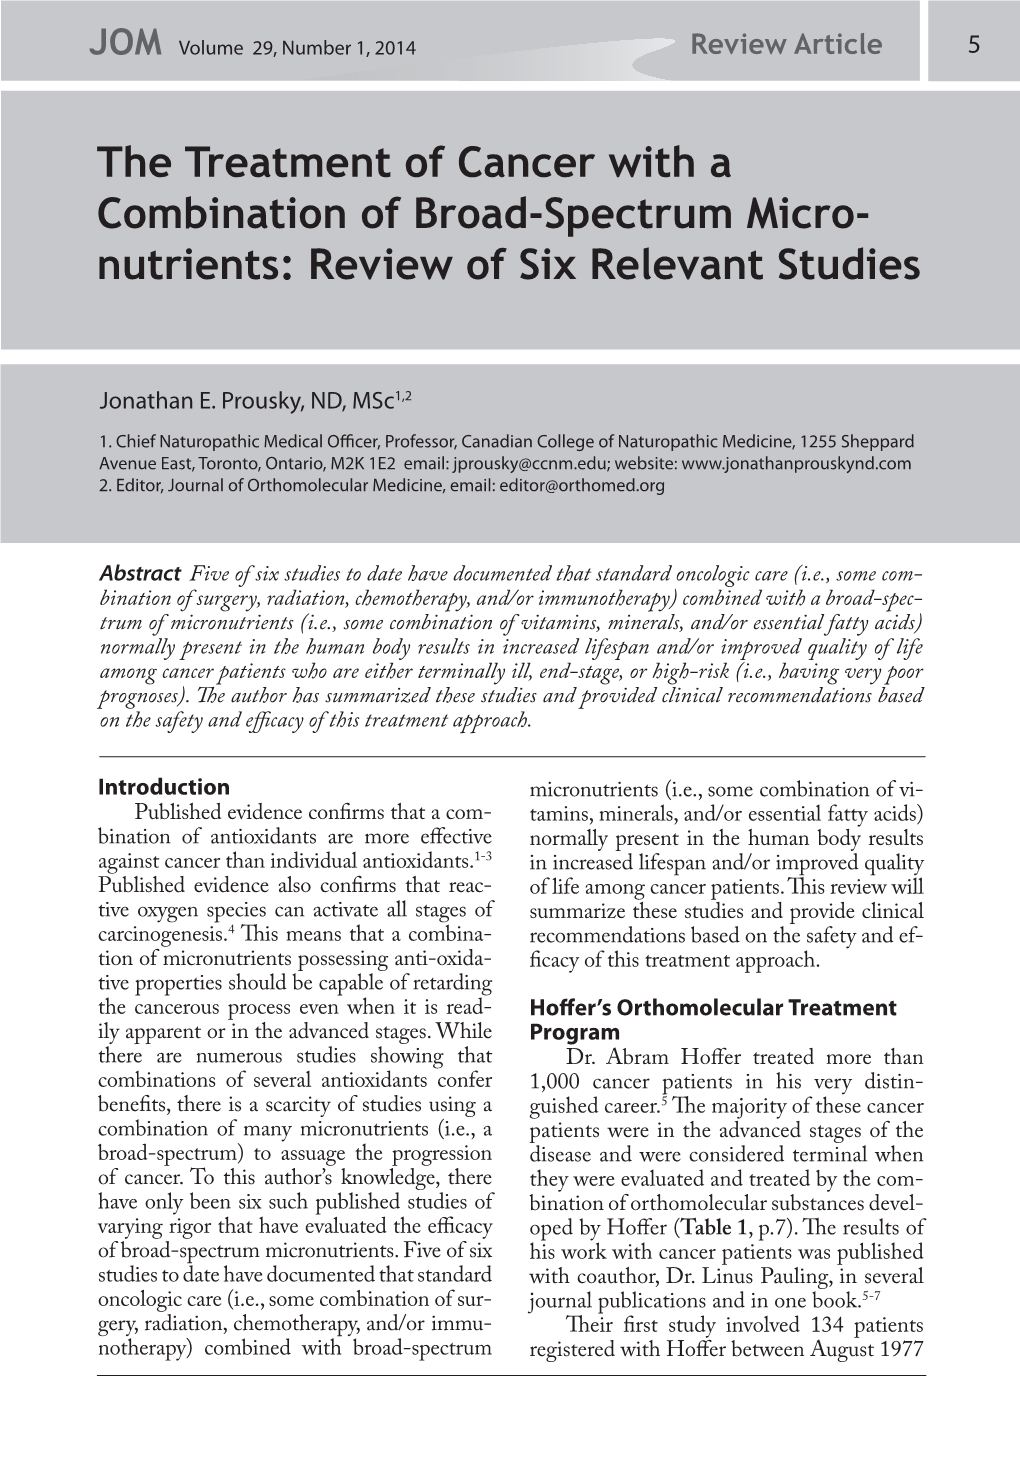 The Treatment of Cancer with a Combination of Broad-Spectrum Micro- Nutrients: Review of Six Relevant Studies